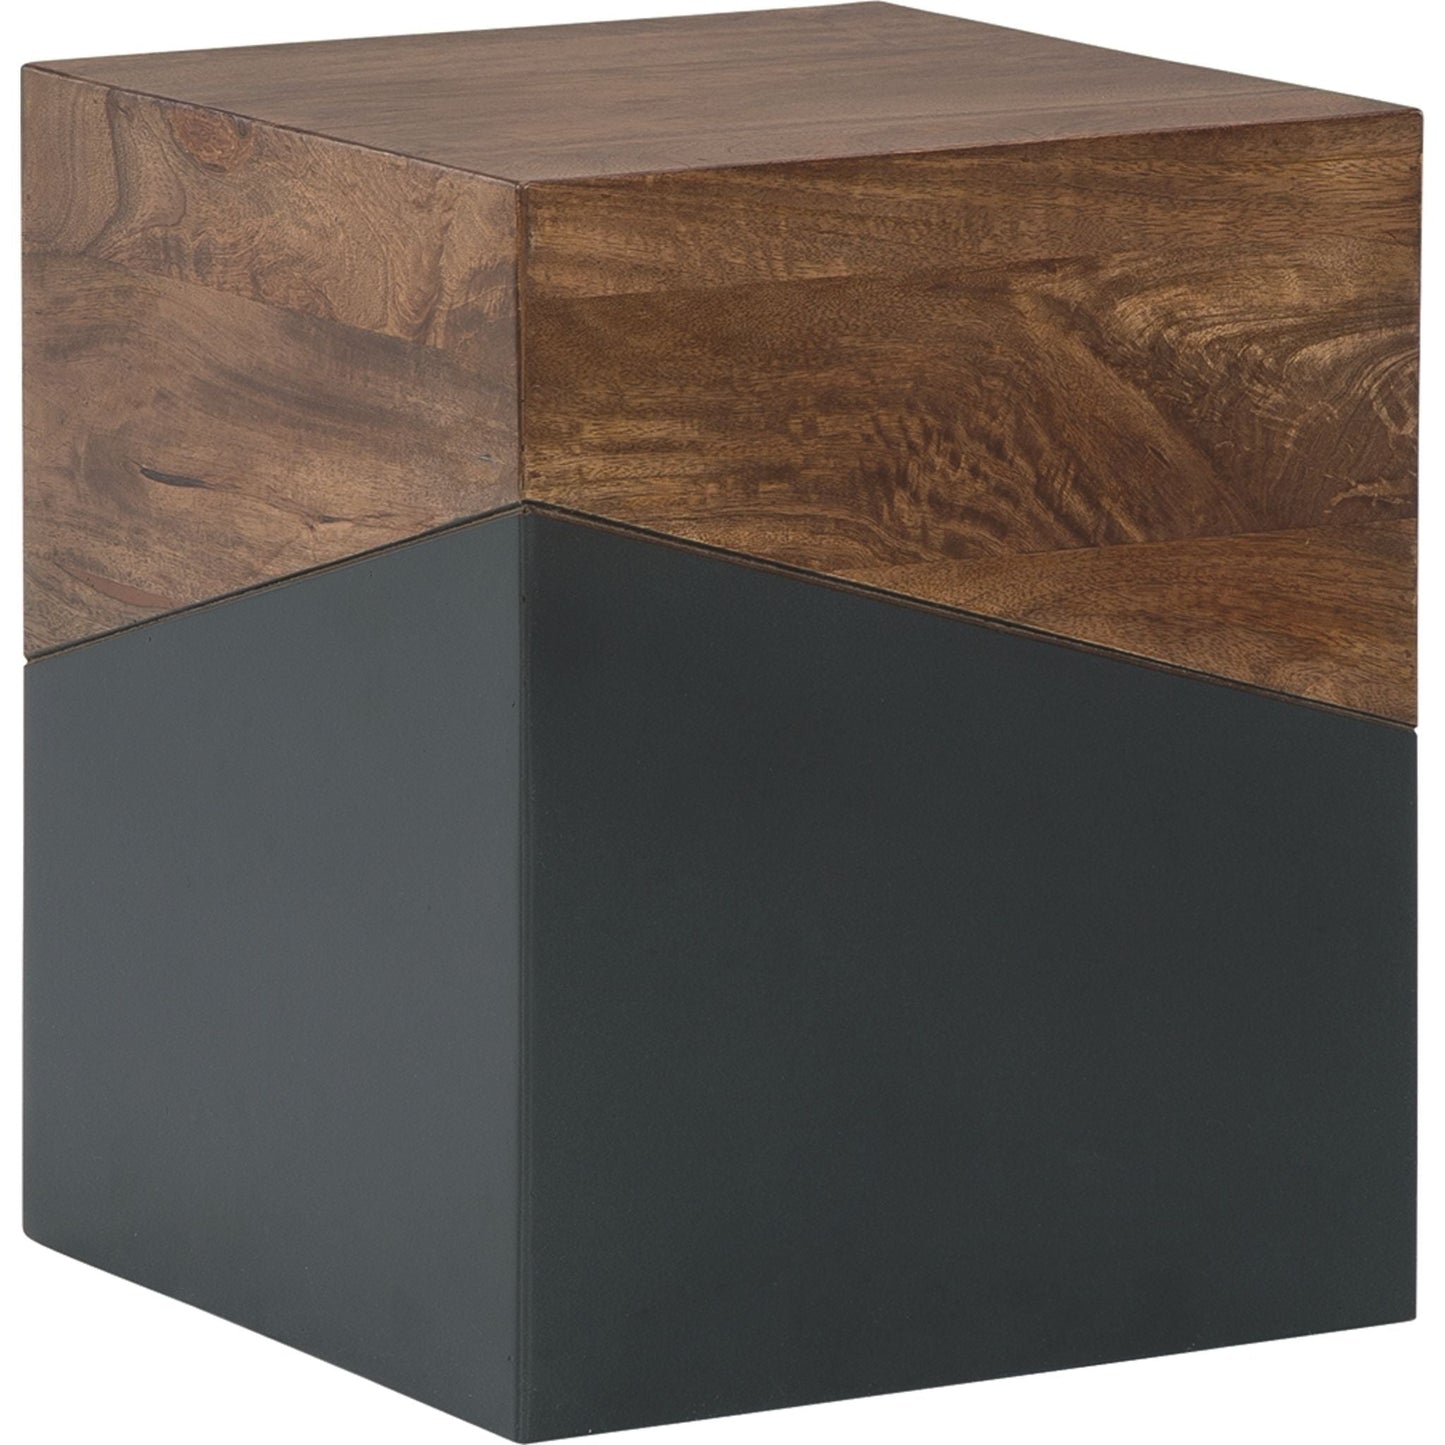 Trailbend Accent Table - Brown/Gunmetal